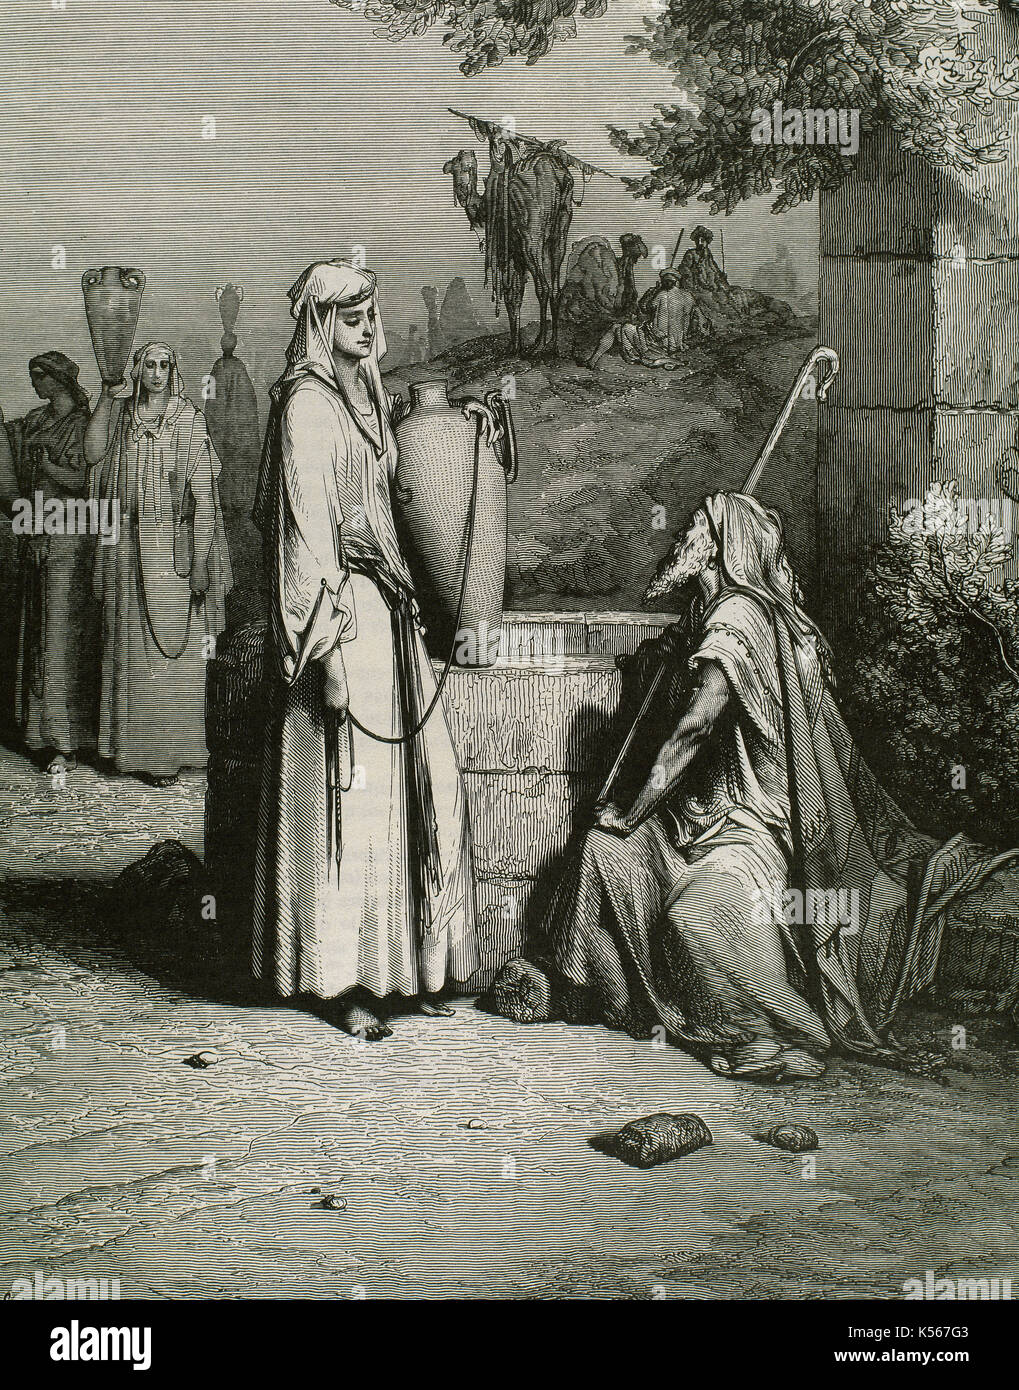 Old Testament. Book of Genesis. Rebecca and Eliezer at the well. Engraving by Gustave Dore (1832-1883). Stock Photo